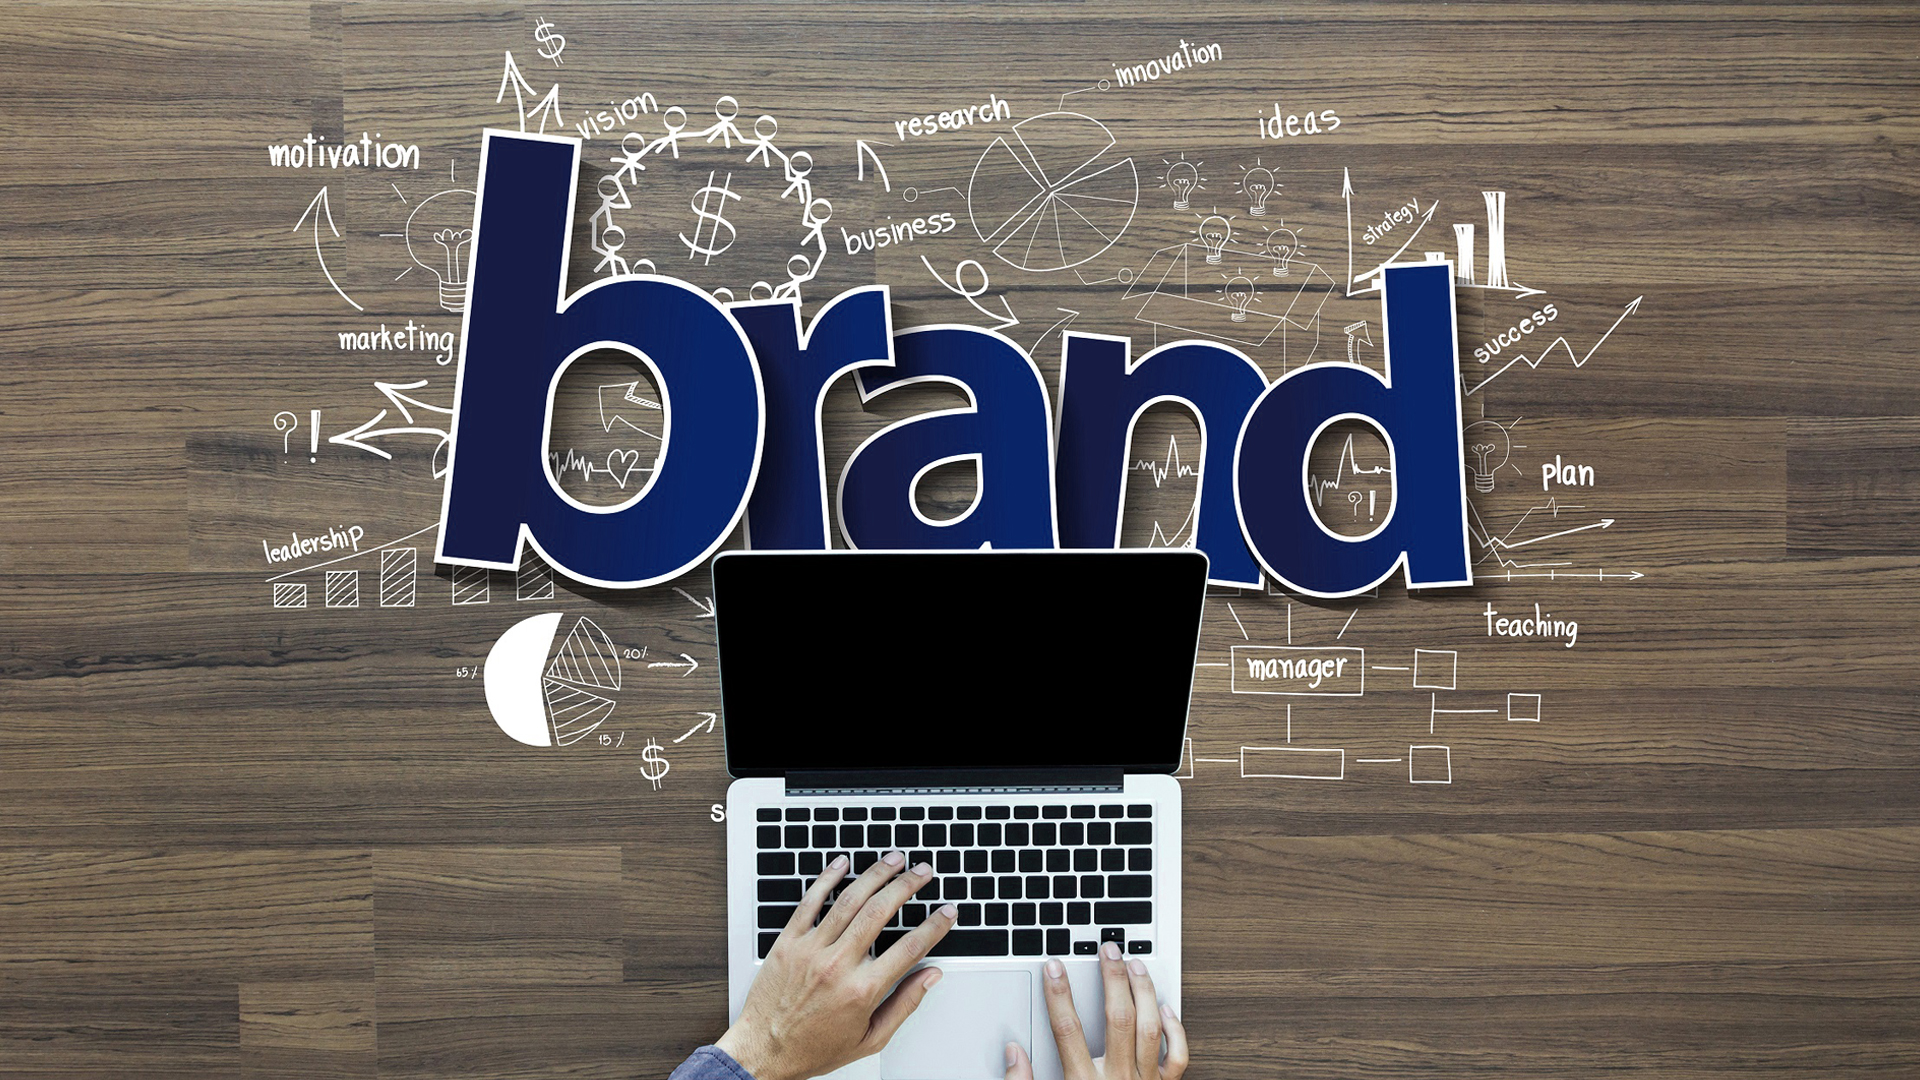 Quick Tips To Build A Powerful Brand Identity | Snowdrop Solution